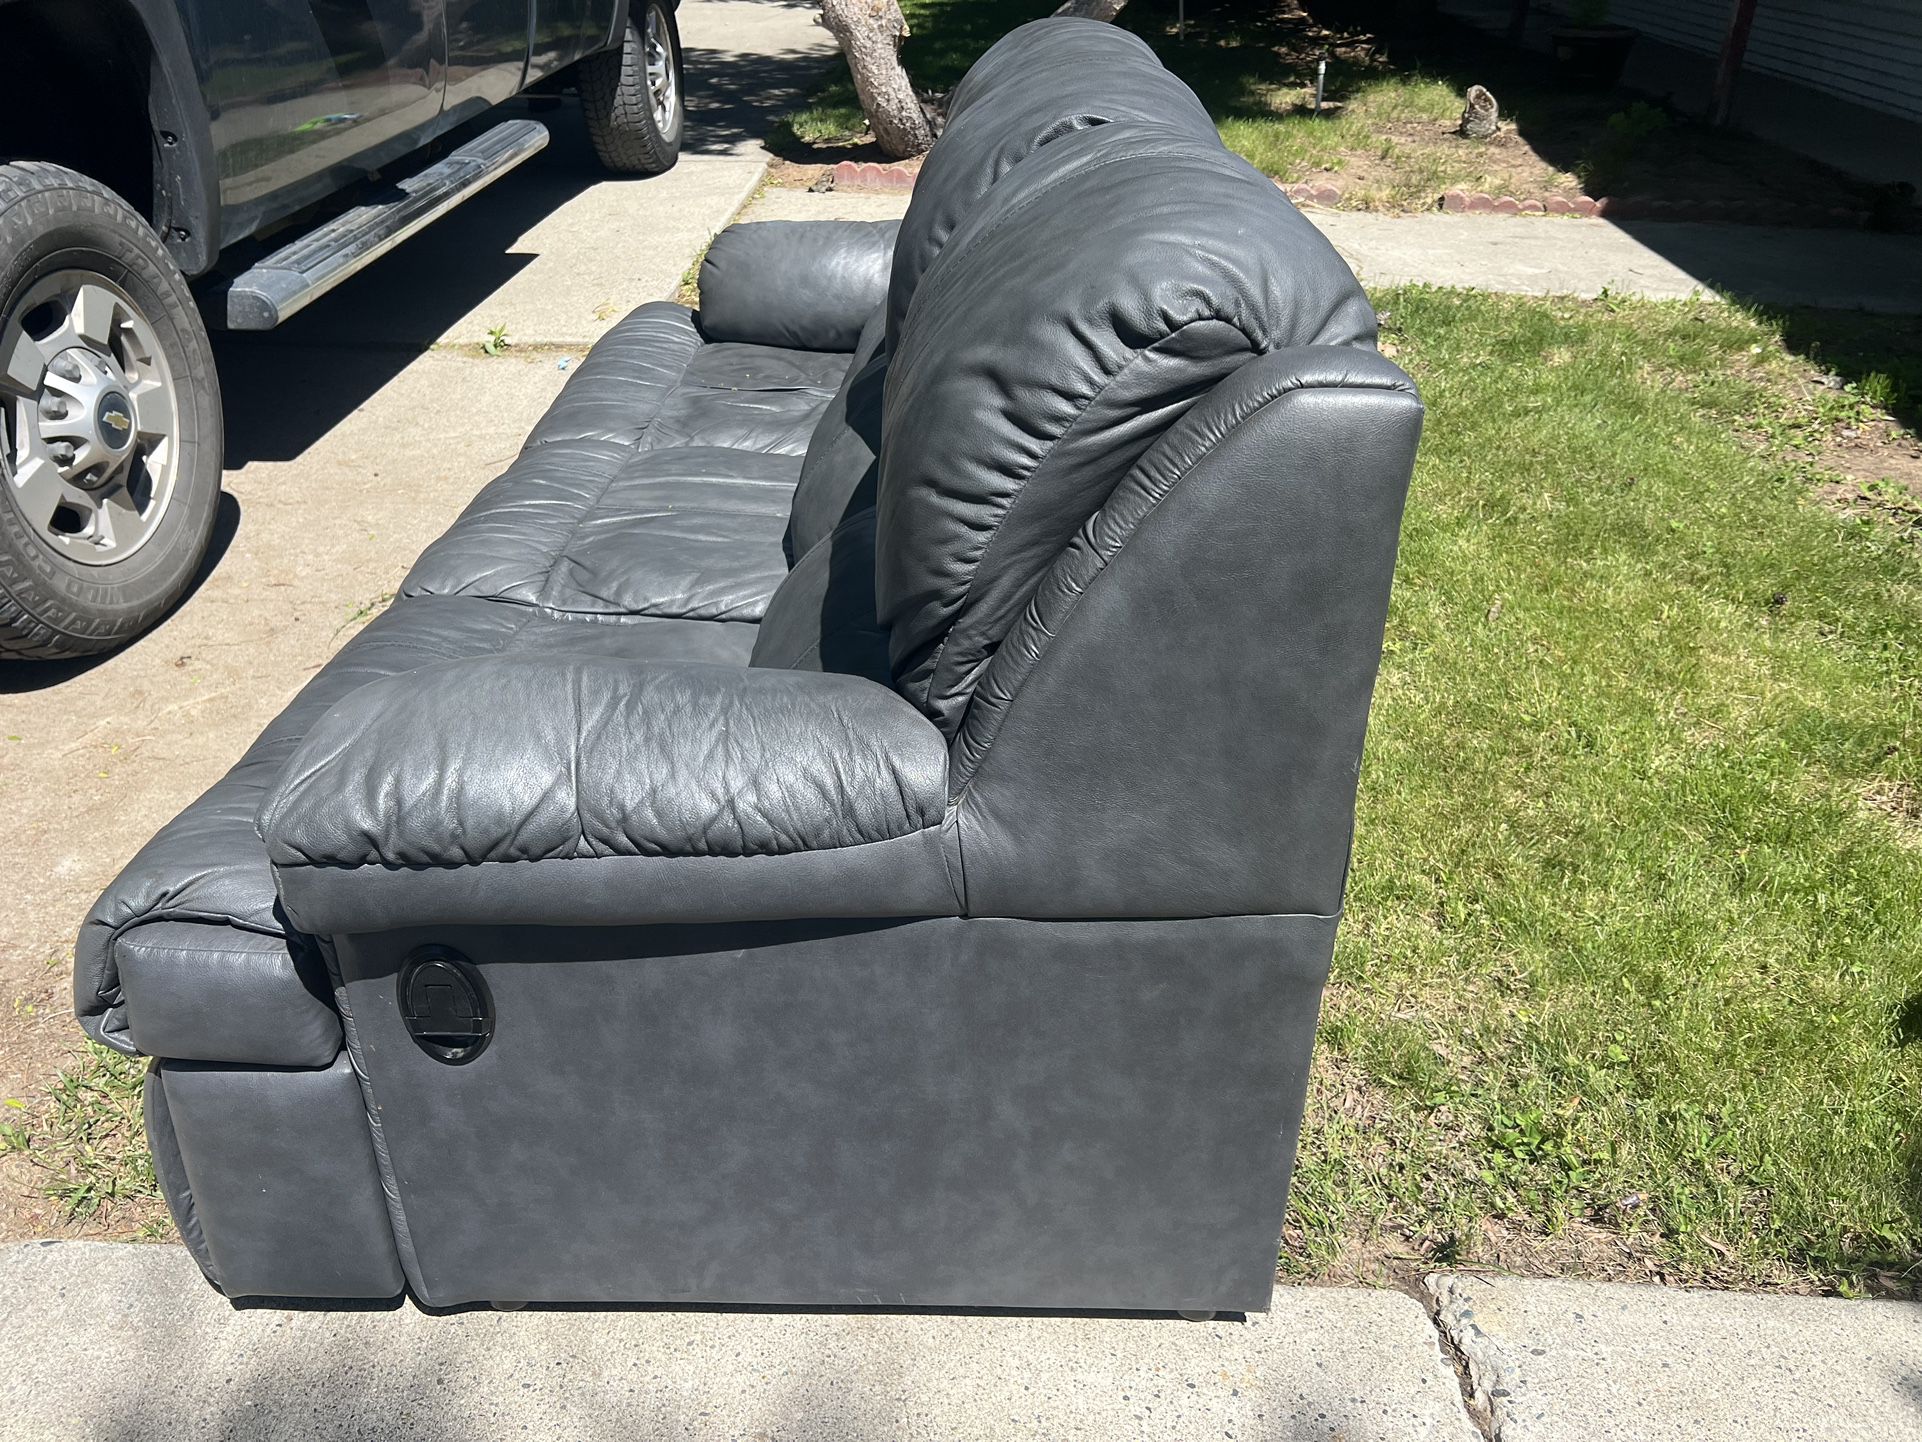 Couch FREE